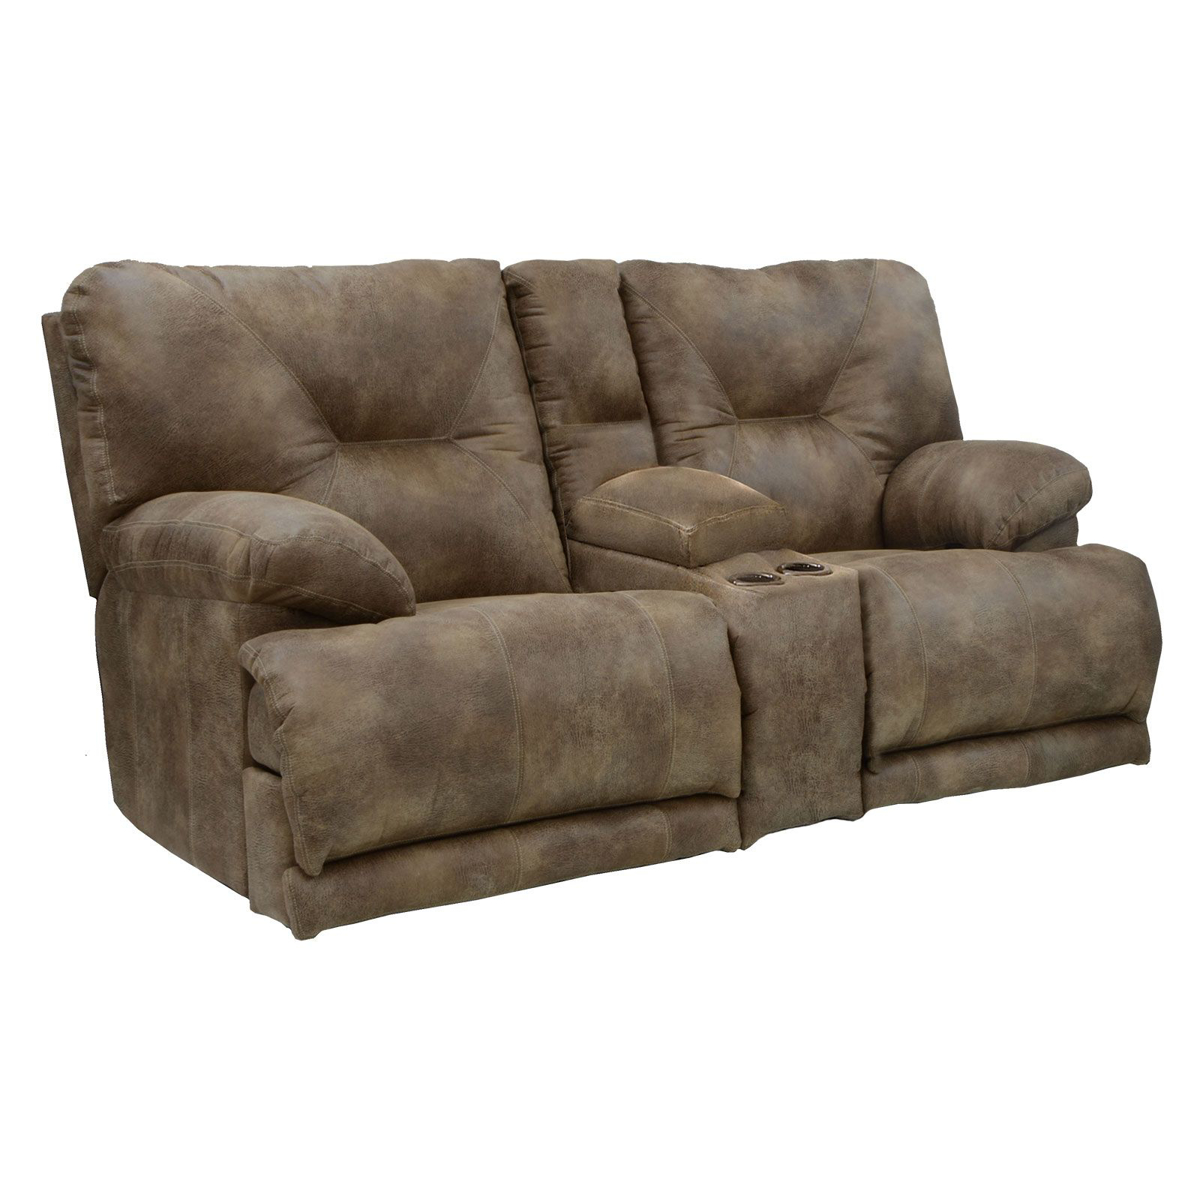 Picture of Voyager Lay Flat Power Recliner Loveseat